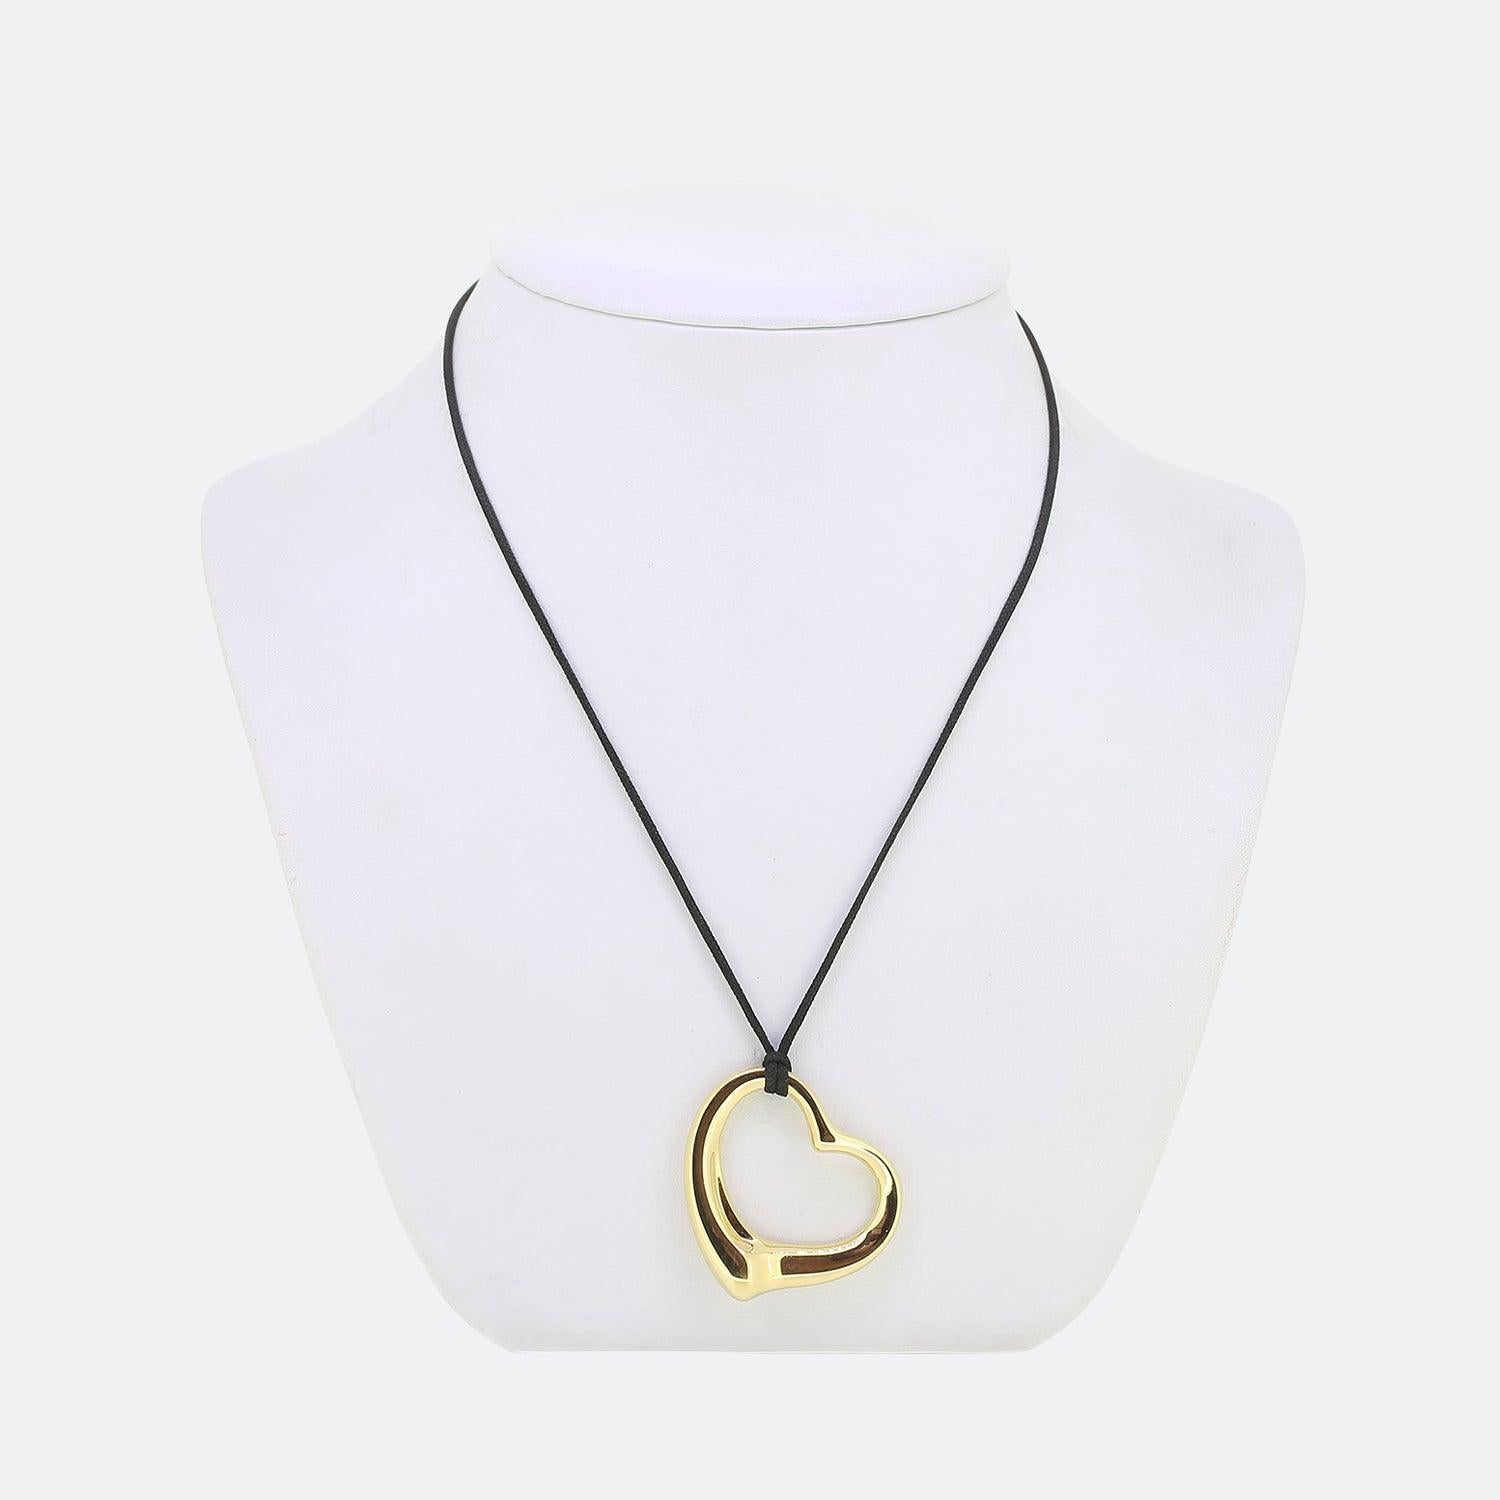 Here we have a beautifully crafted necklace from the world renowned jewellery designer, Tiffany & Co. Forming part of the Elsa Peretti collection, this iconic open heart design celebrates the spirit of love. Crafted from 18ct yellow gold, the